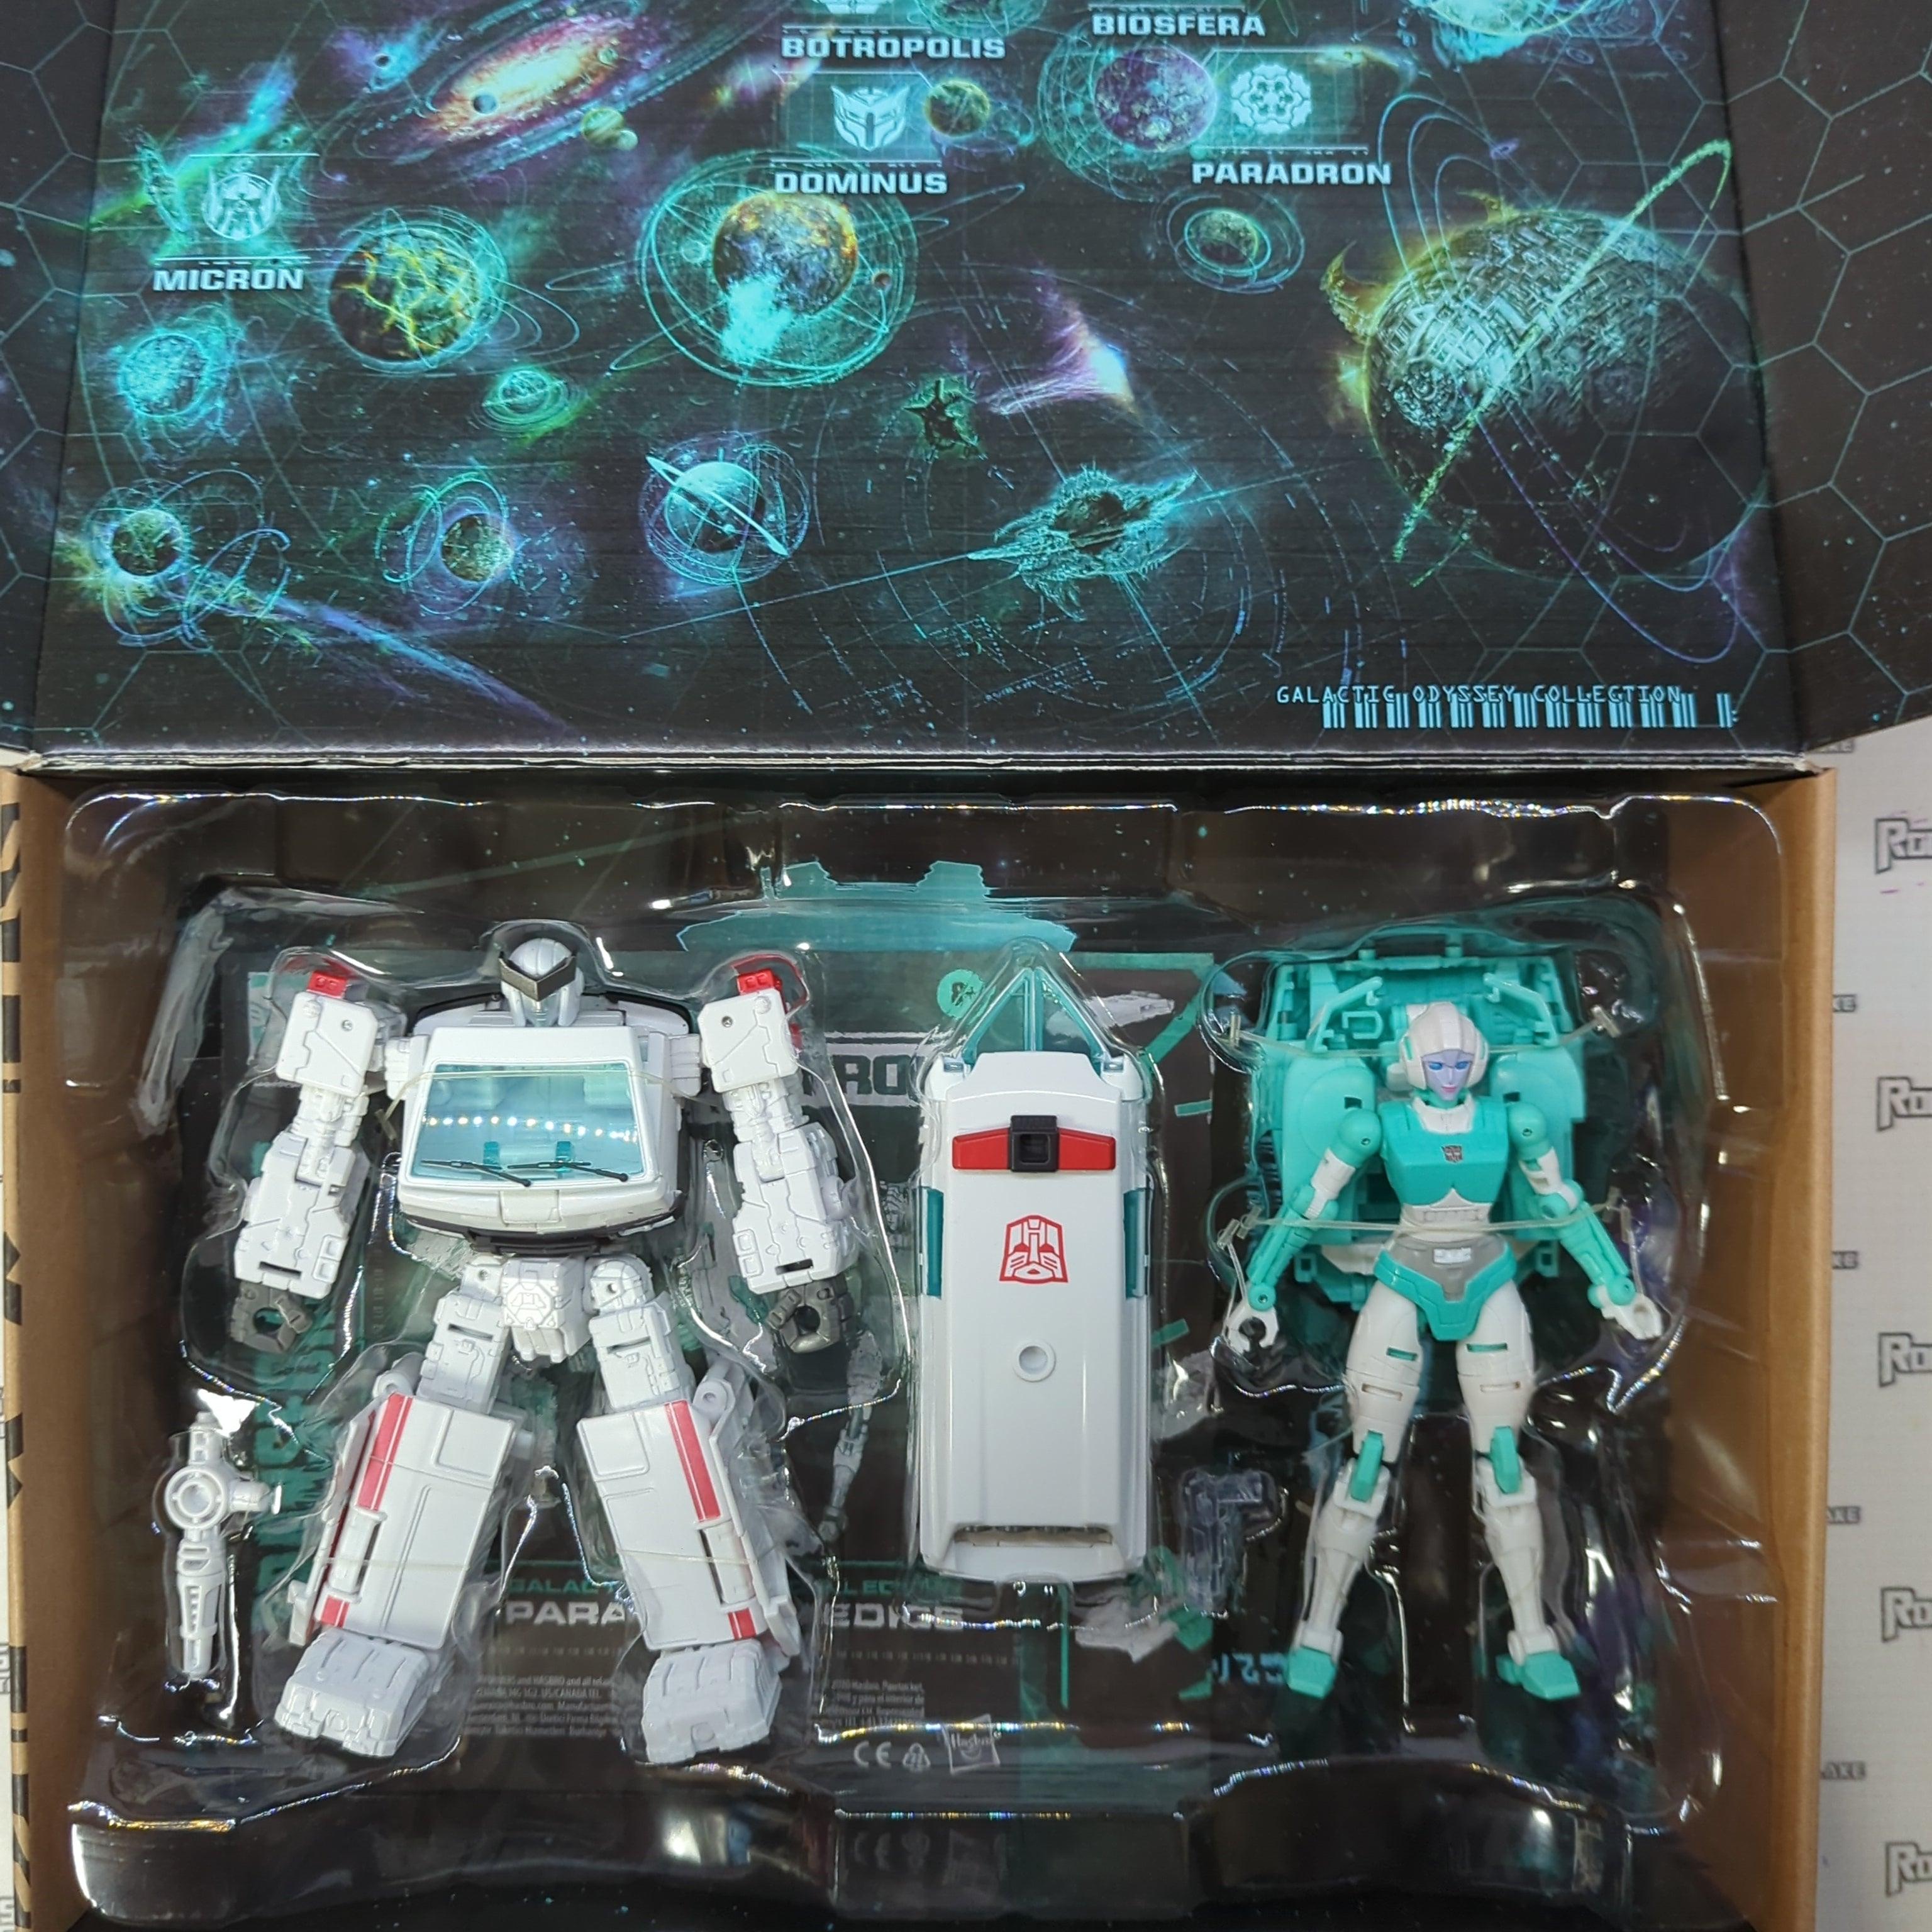 Hasbro Transformers War for Cybertron Trilogy Galactic Odyssey Collection Paradron Medics